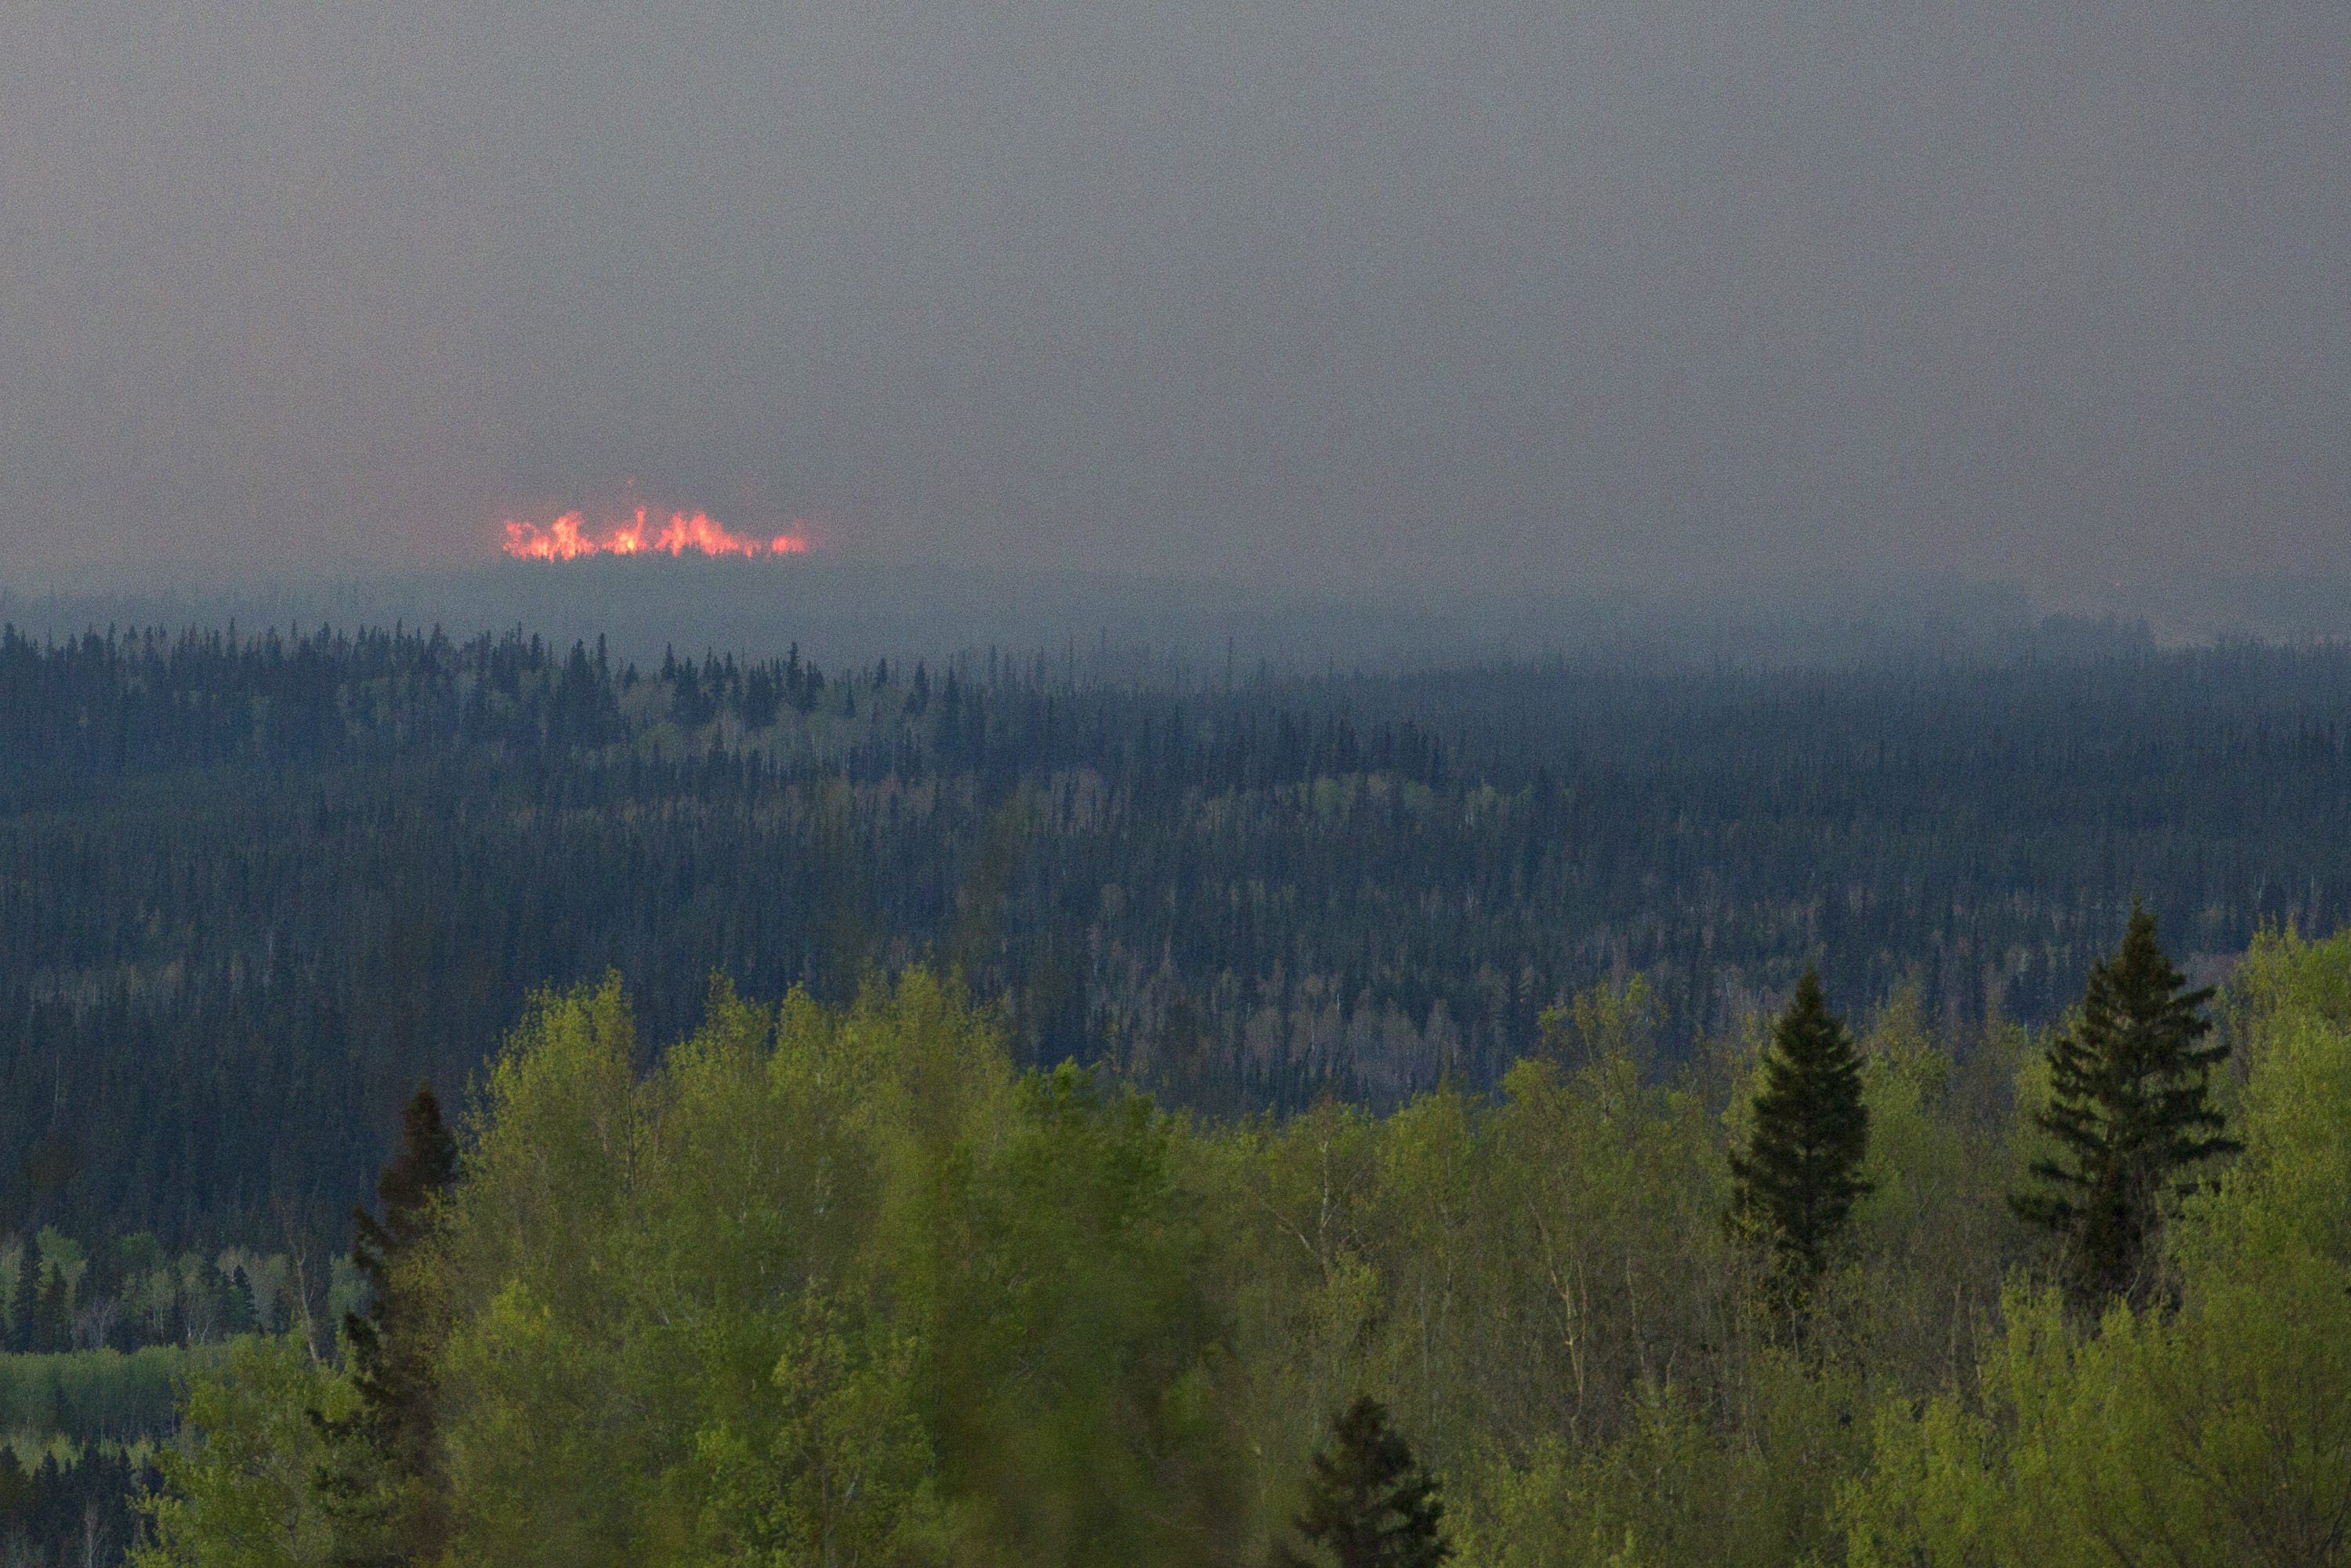 A wildfire flares up near Fort McMurray, Canada, Thursday, May 5, 2016. Canadian officials will start moving thousands of people from work camps north of devastated Fort McMurray in a mass highway convoy Friday morning if it is safe from the wildfire raging in Alberta. (Jason Franson/The Canadian Press via AP) MANDATORY CREDIT